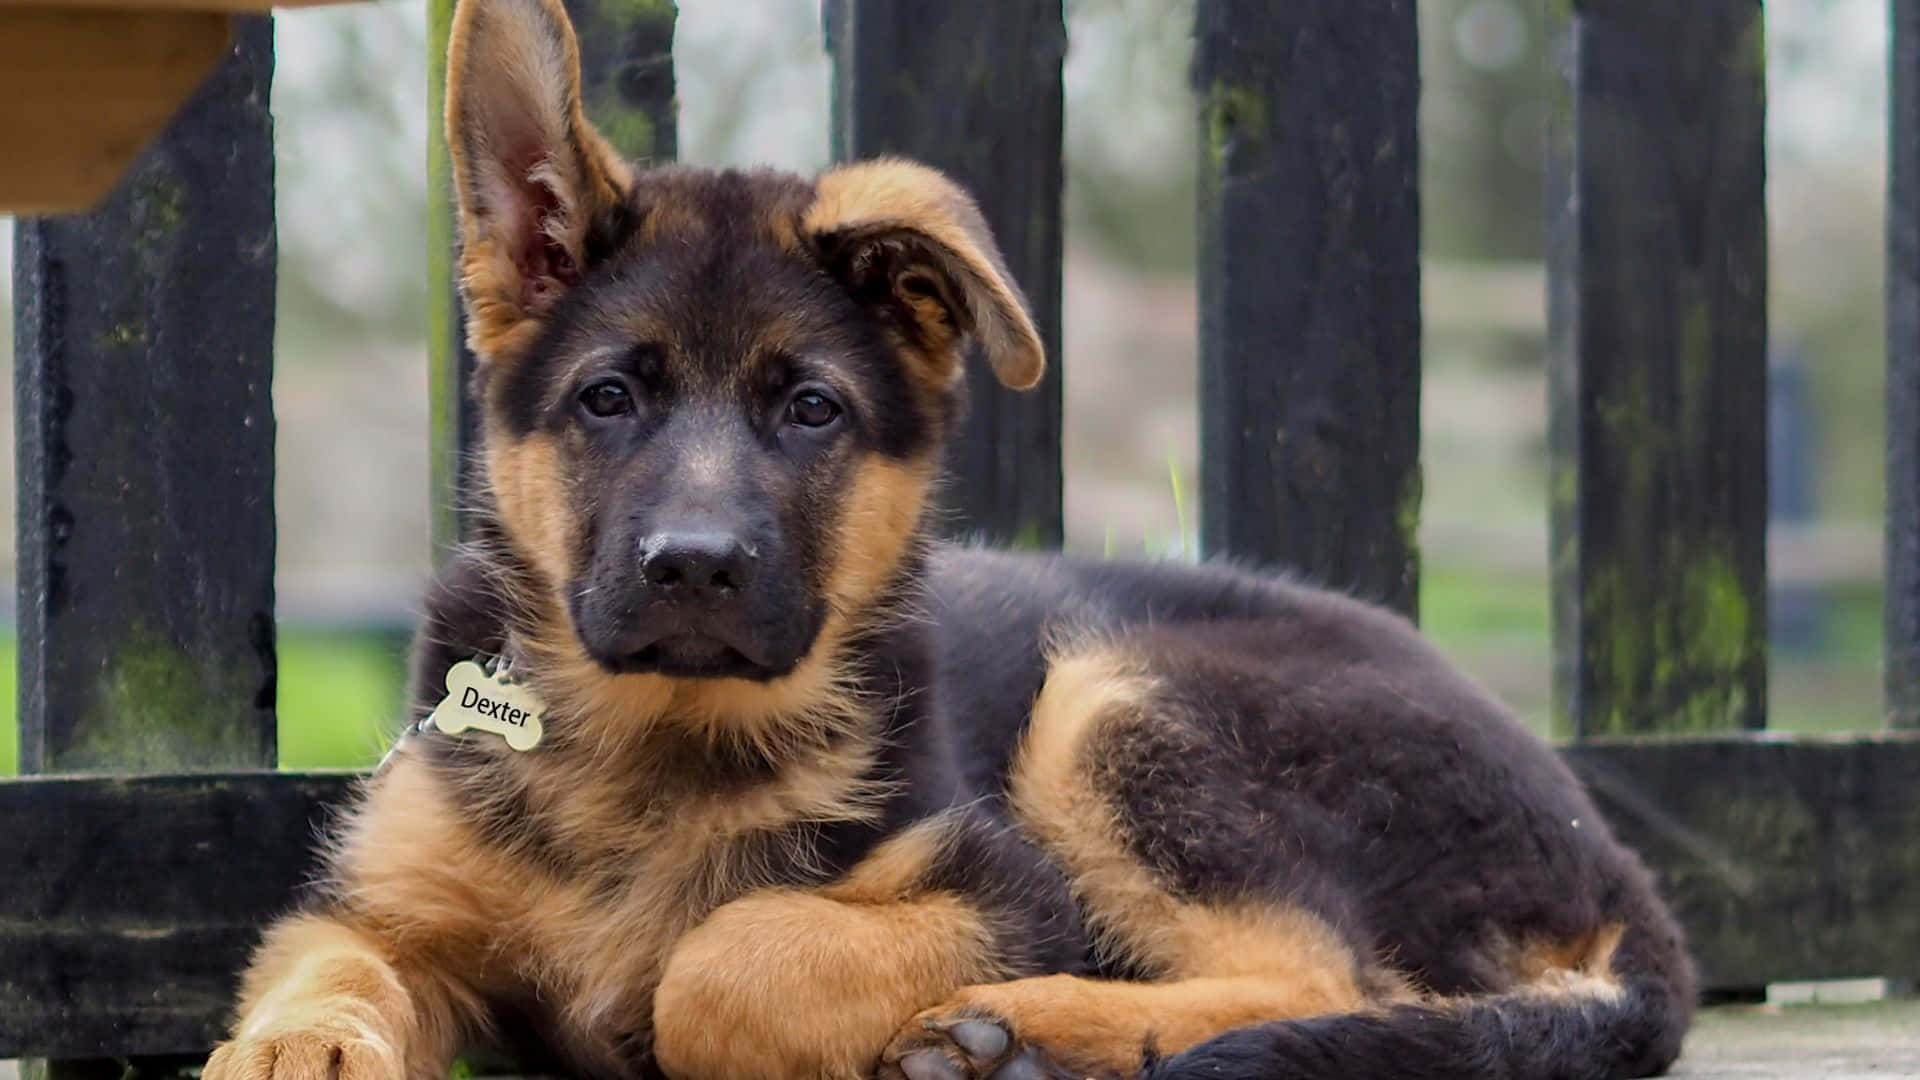 German Shepherd Puppy Laying On A Wooden Bench